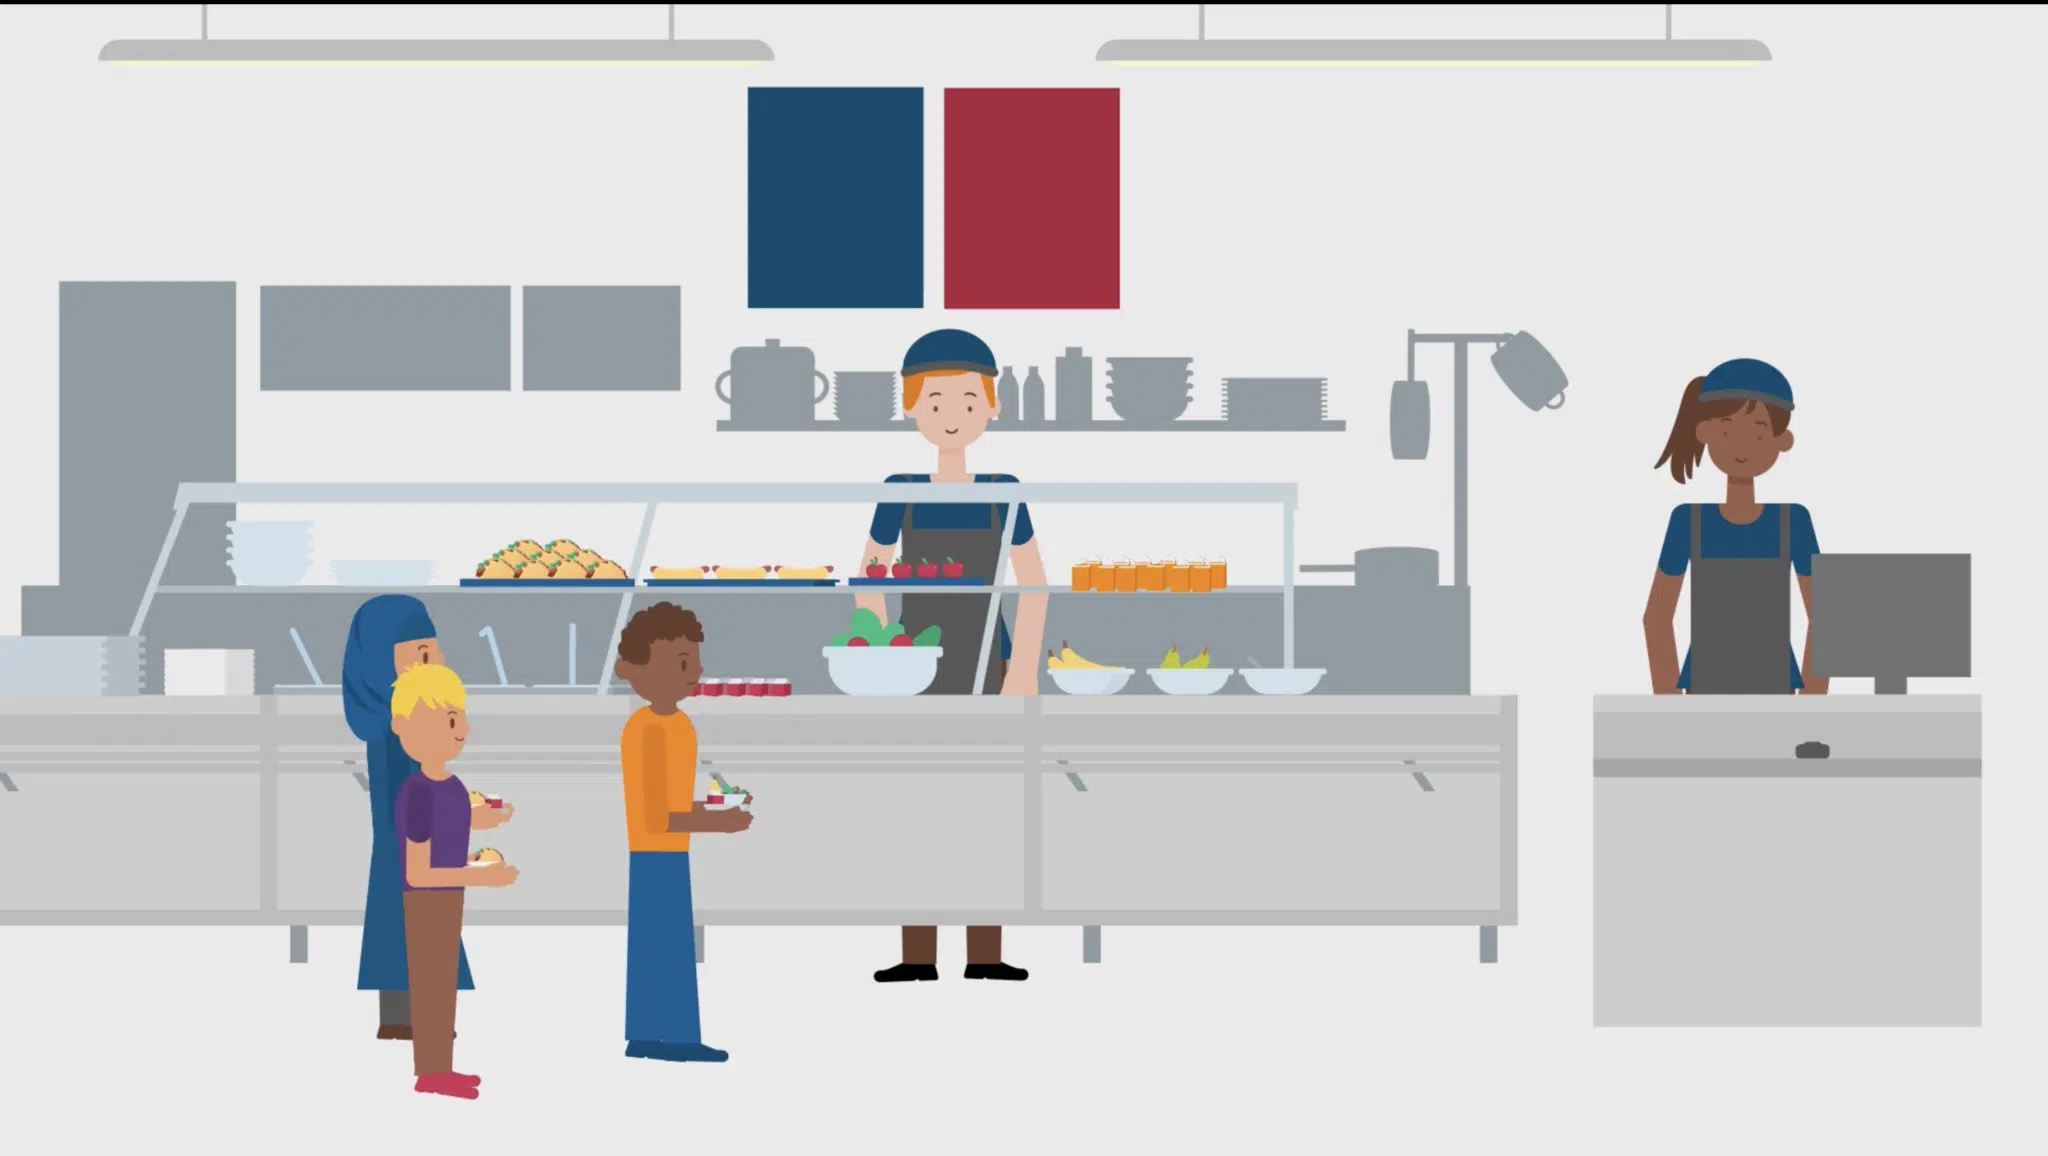 Graphic of students standing in a school lunch line, being served by Nutrition Services staff